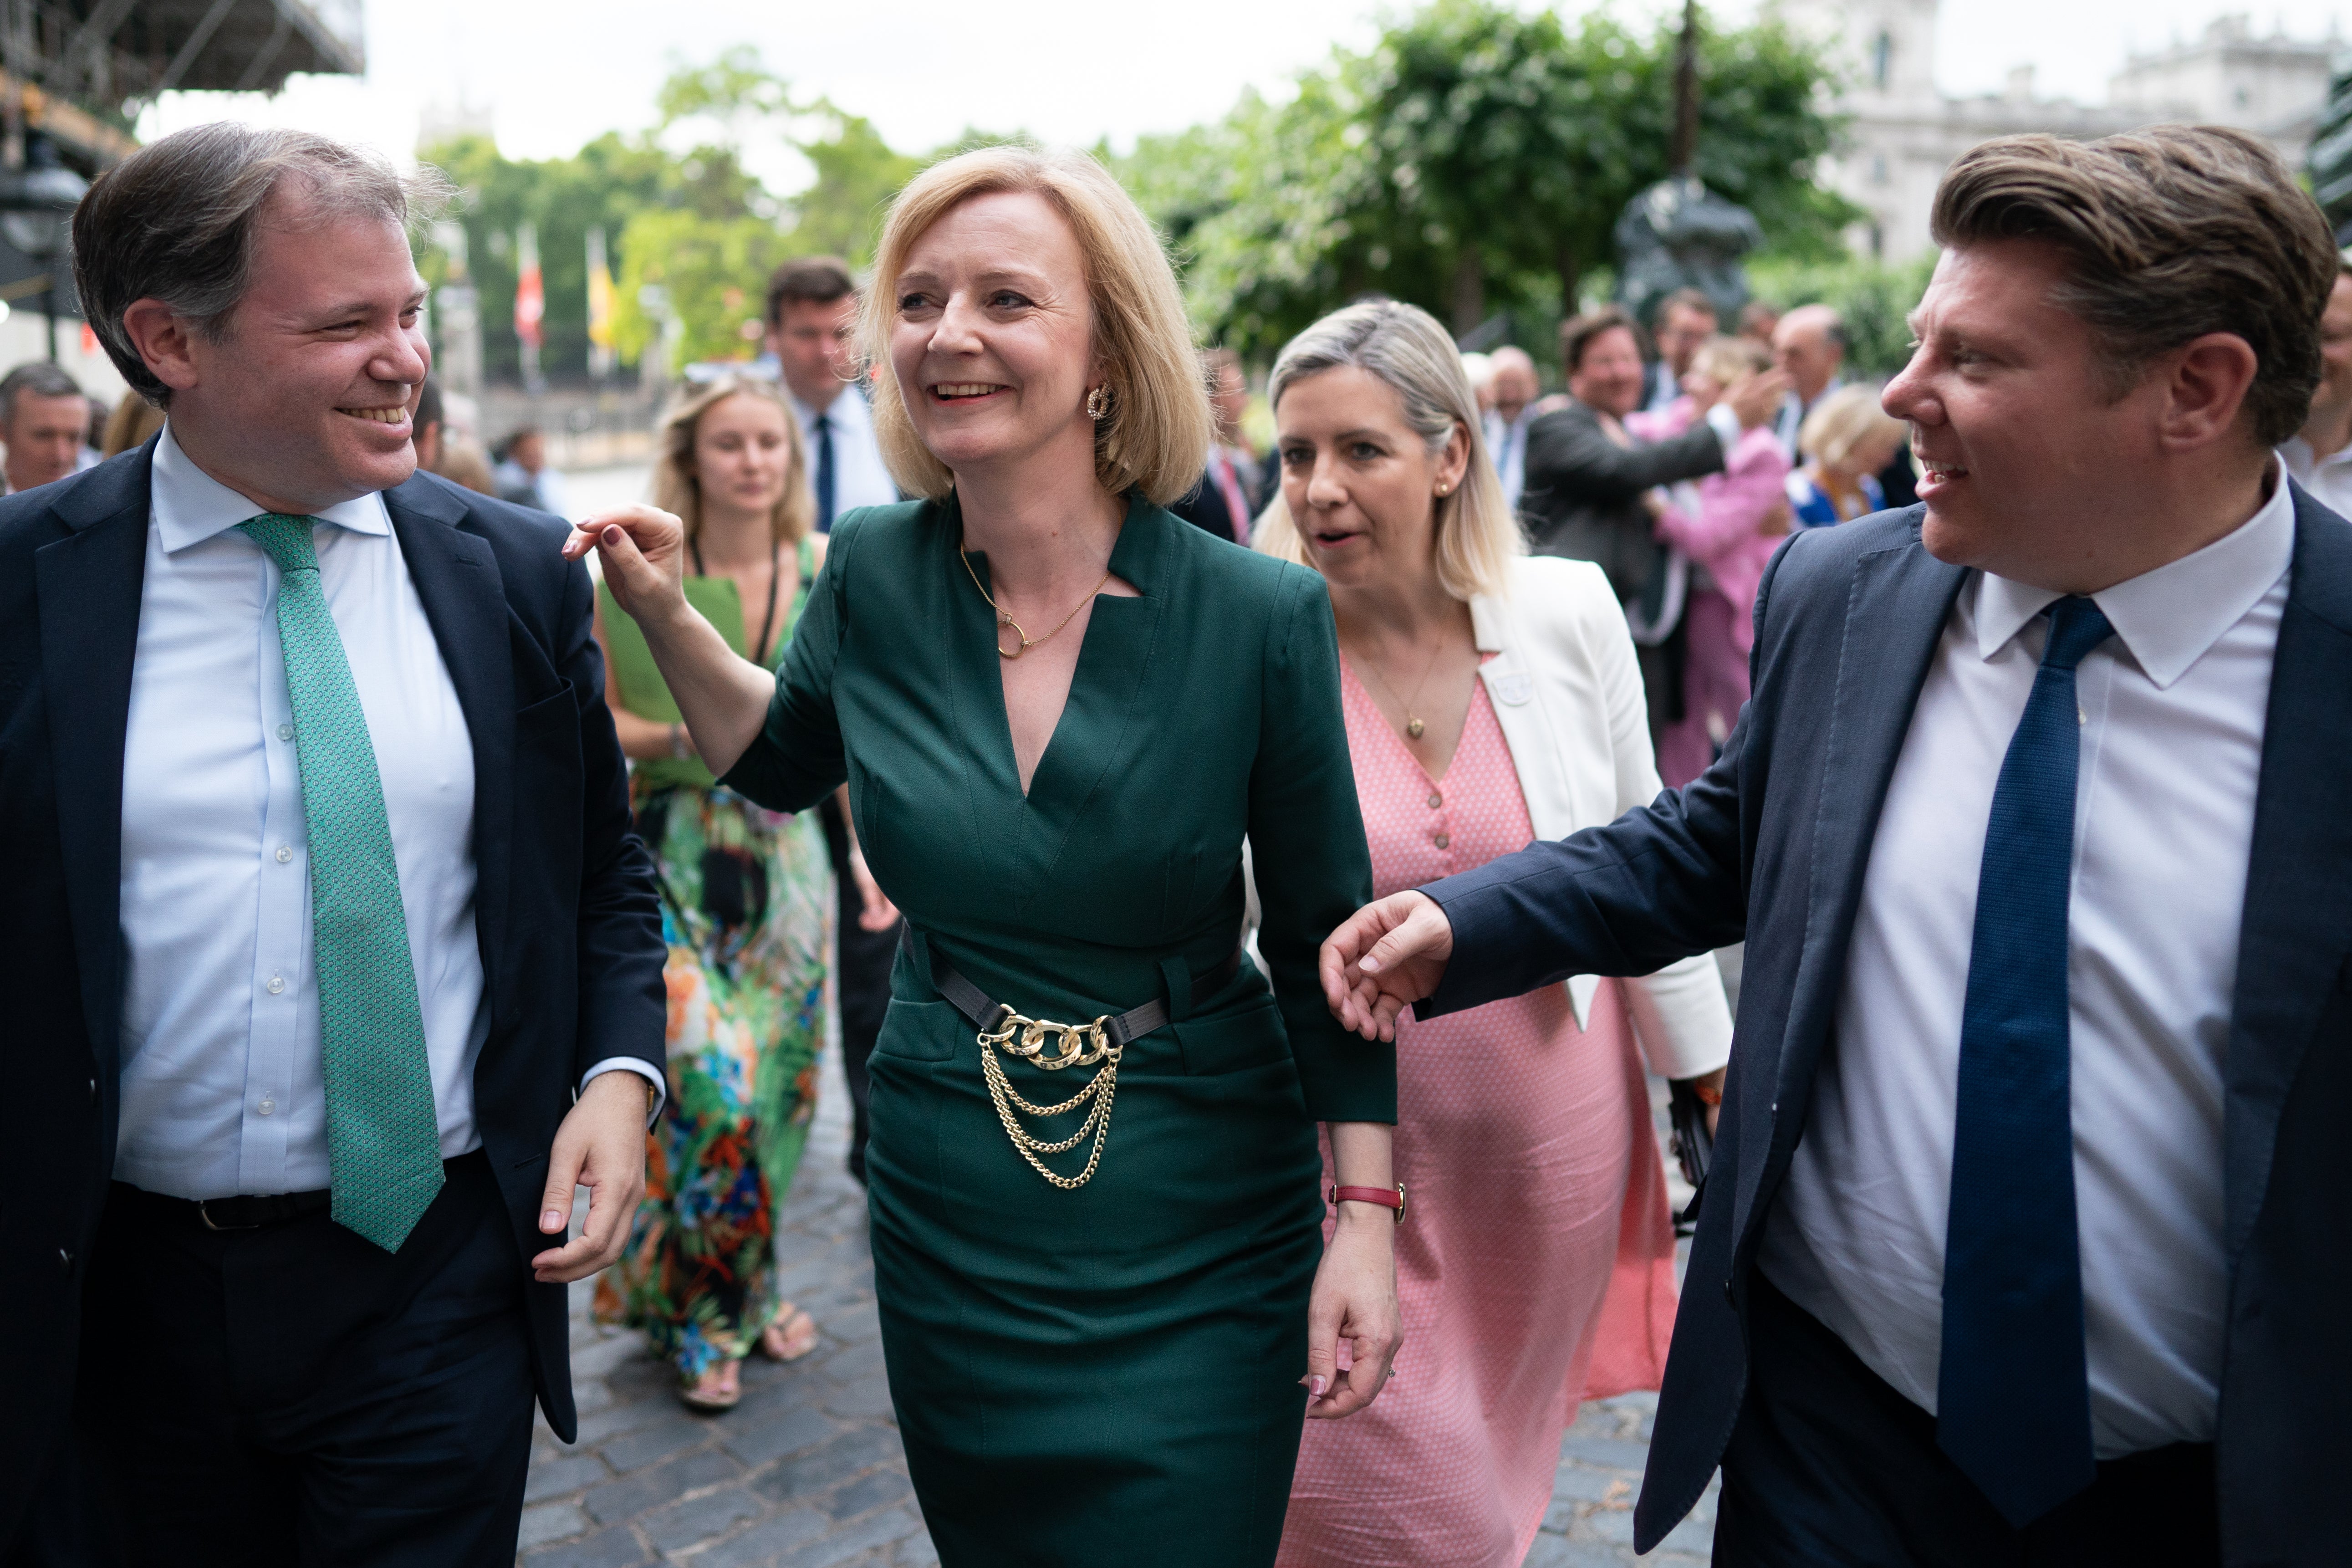 Liz Truss celebrates with her supporters after making it into the final stage of the race to Number 10 (Stefan Rousseau/PA)